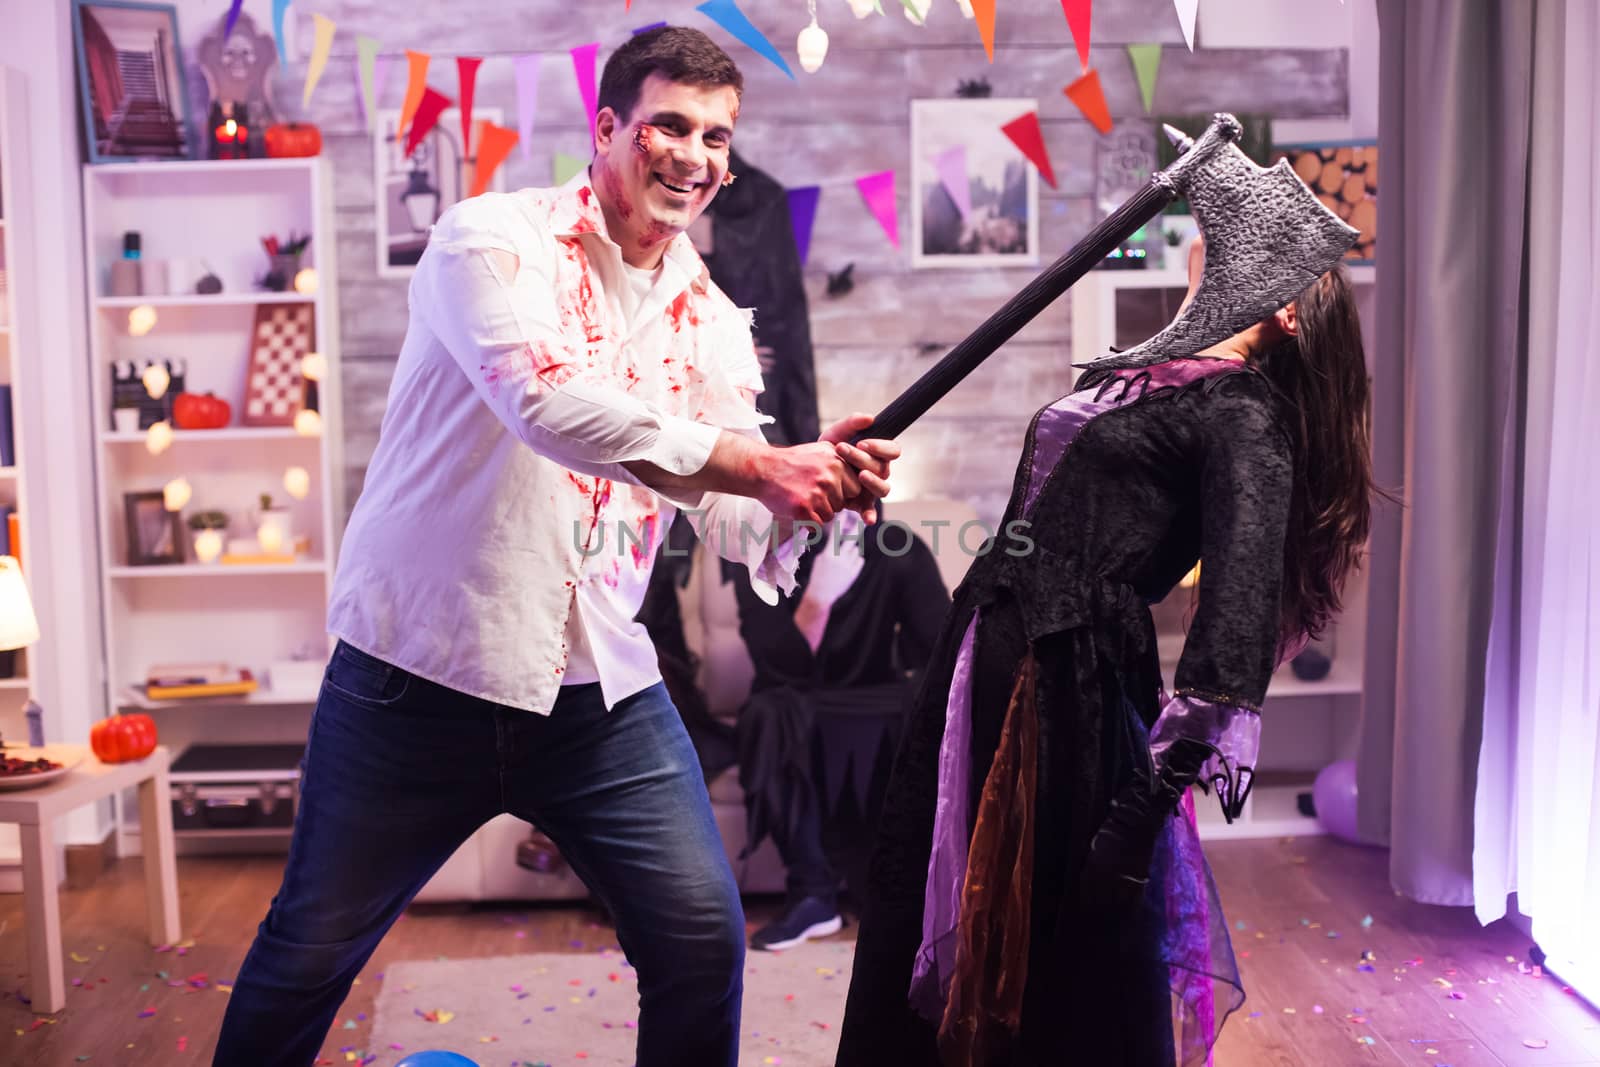 Man dressed up like zombie with an axe trying to kill an evil witch at halloween party.